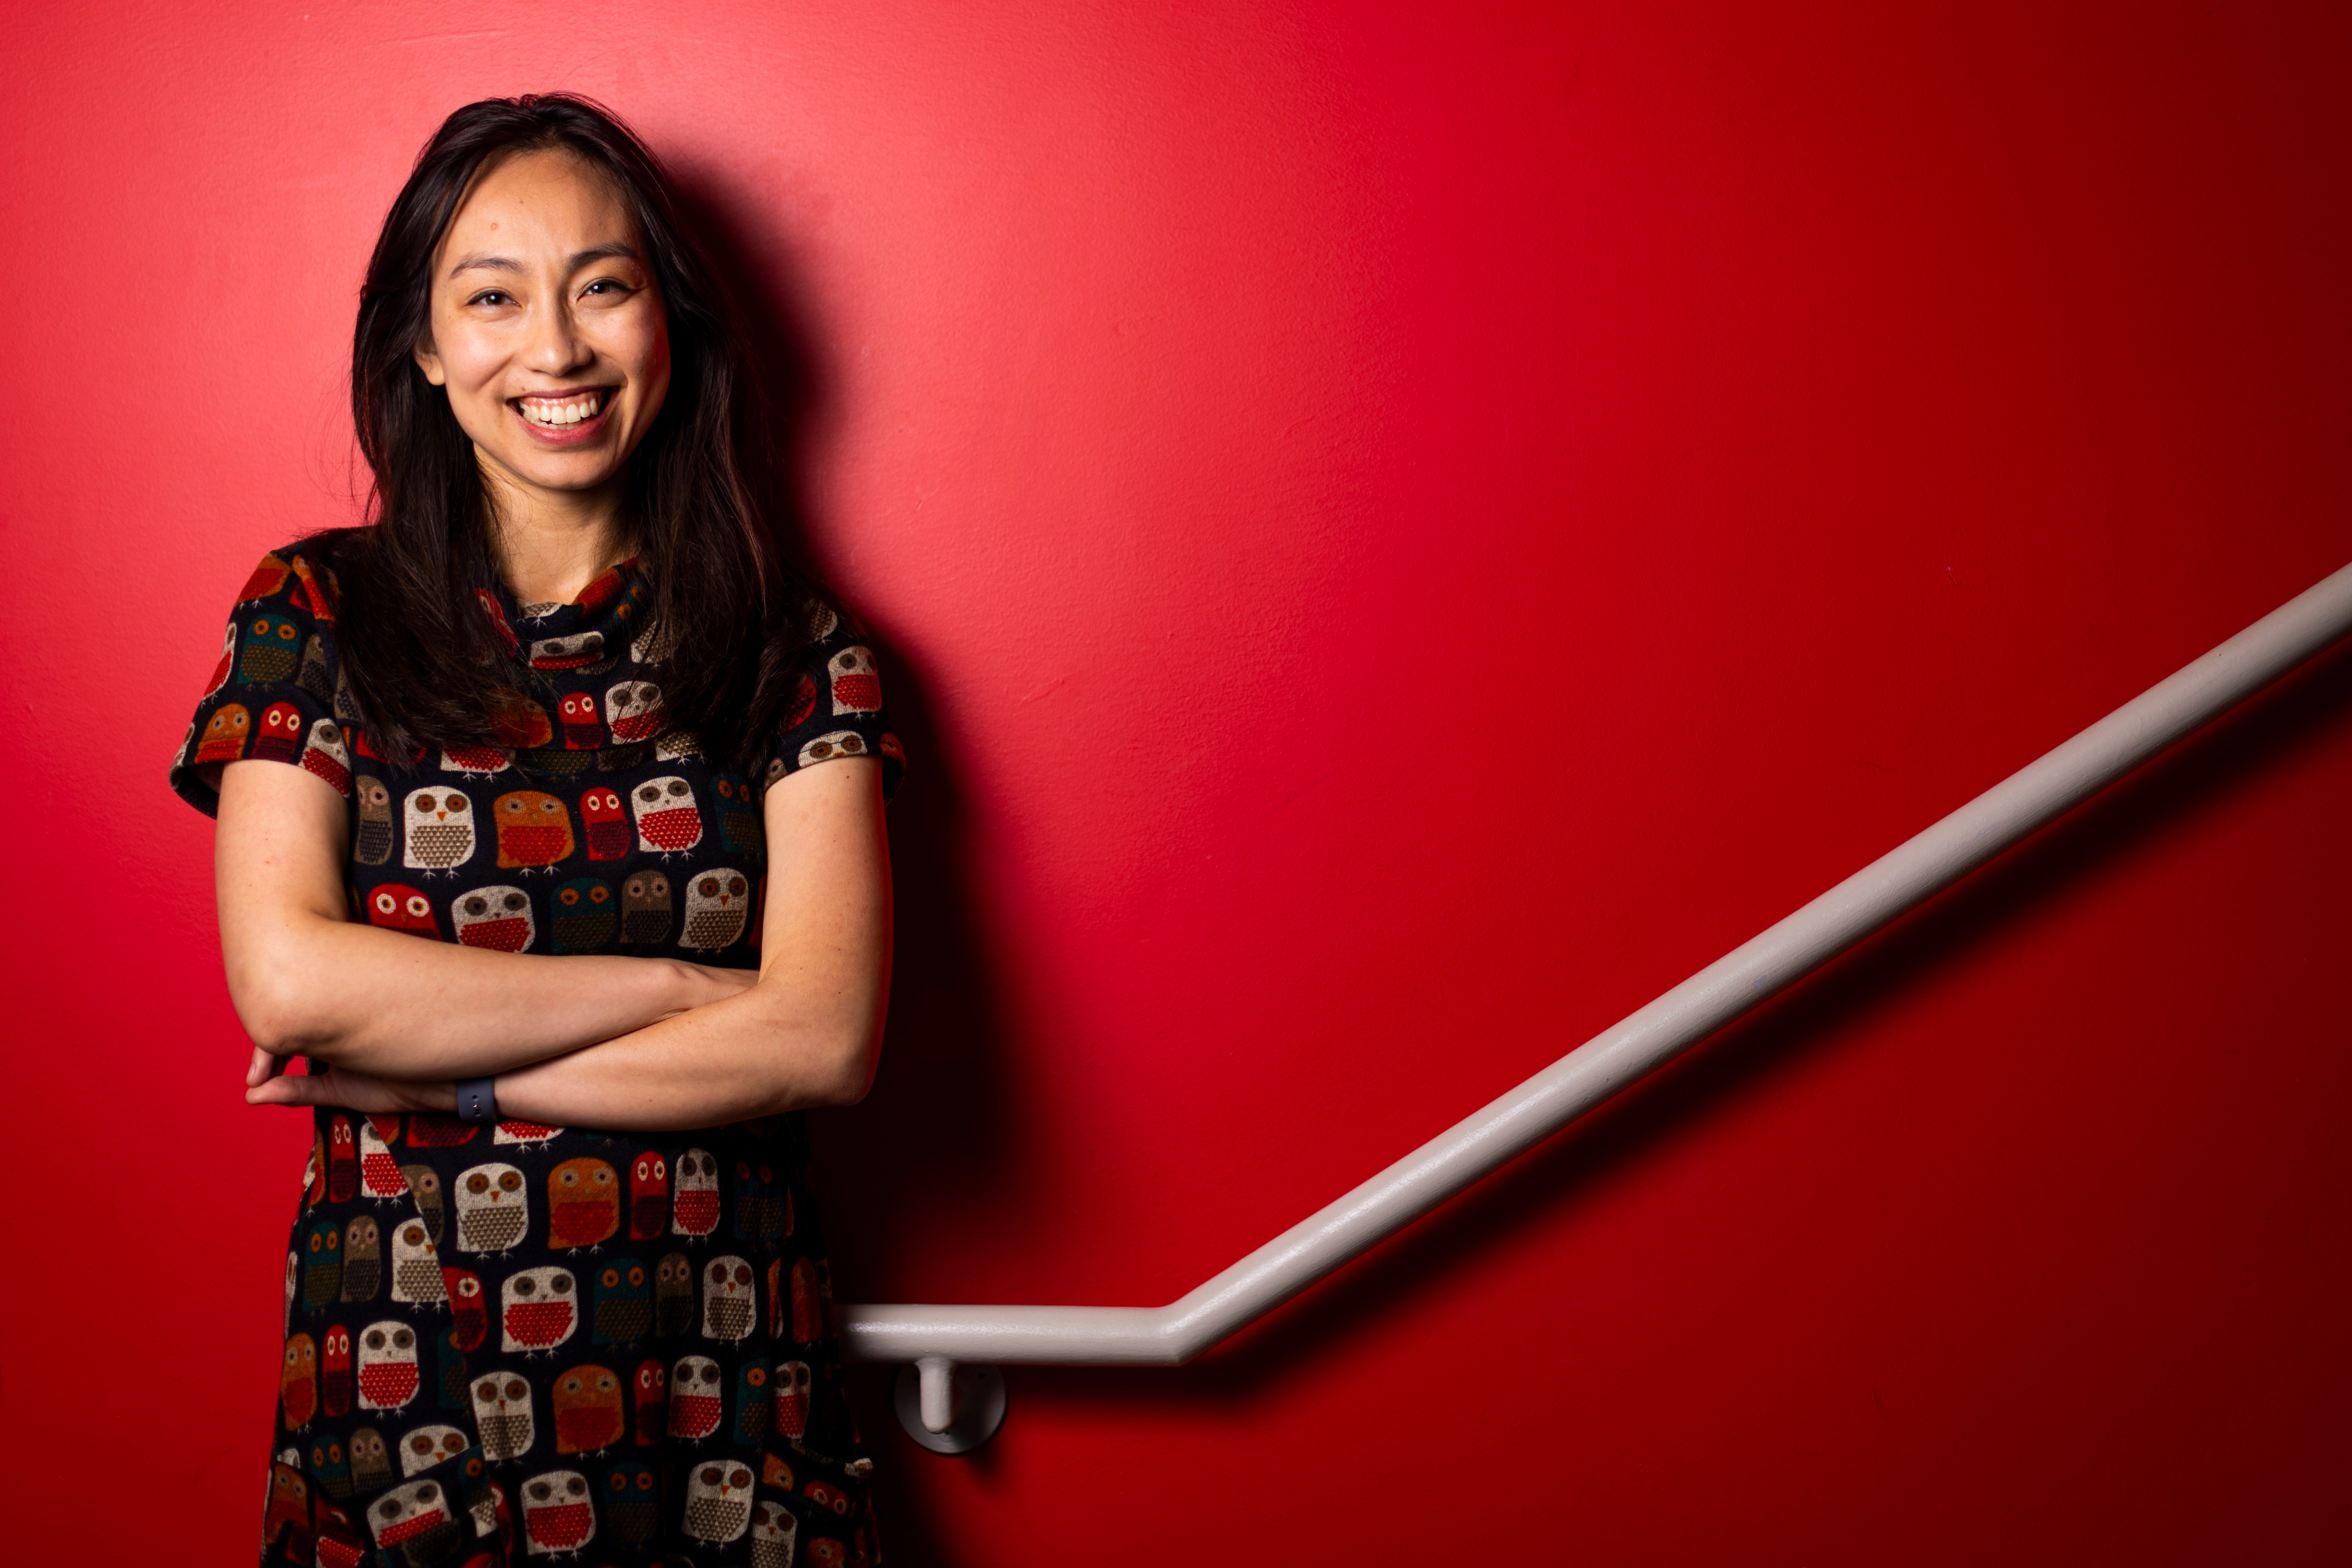 “I love doing research and having my research be related to what’s on people’s minds day-to-day,” says PhD candidate Lisa Ho ’17, who studies barriers that limit women’s participation in the labor force.